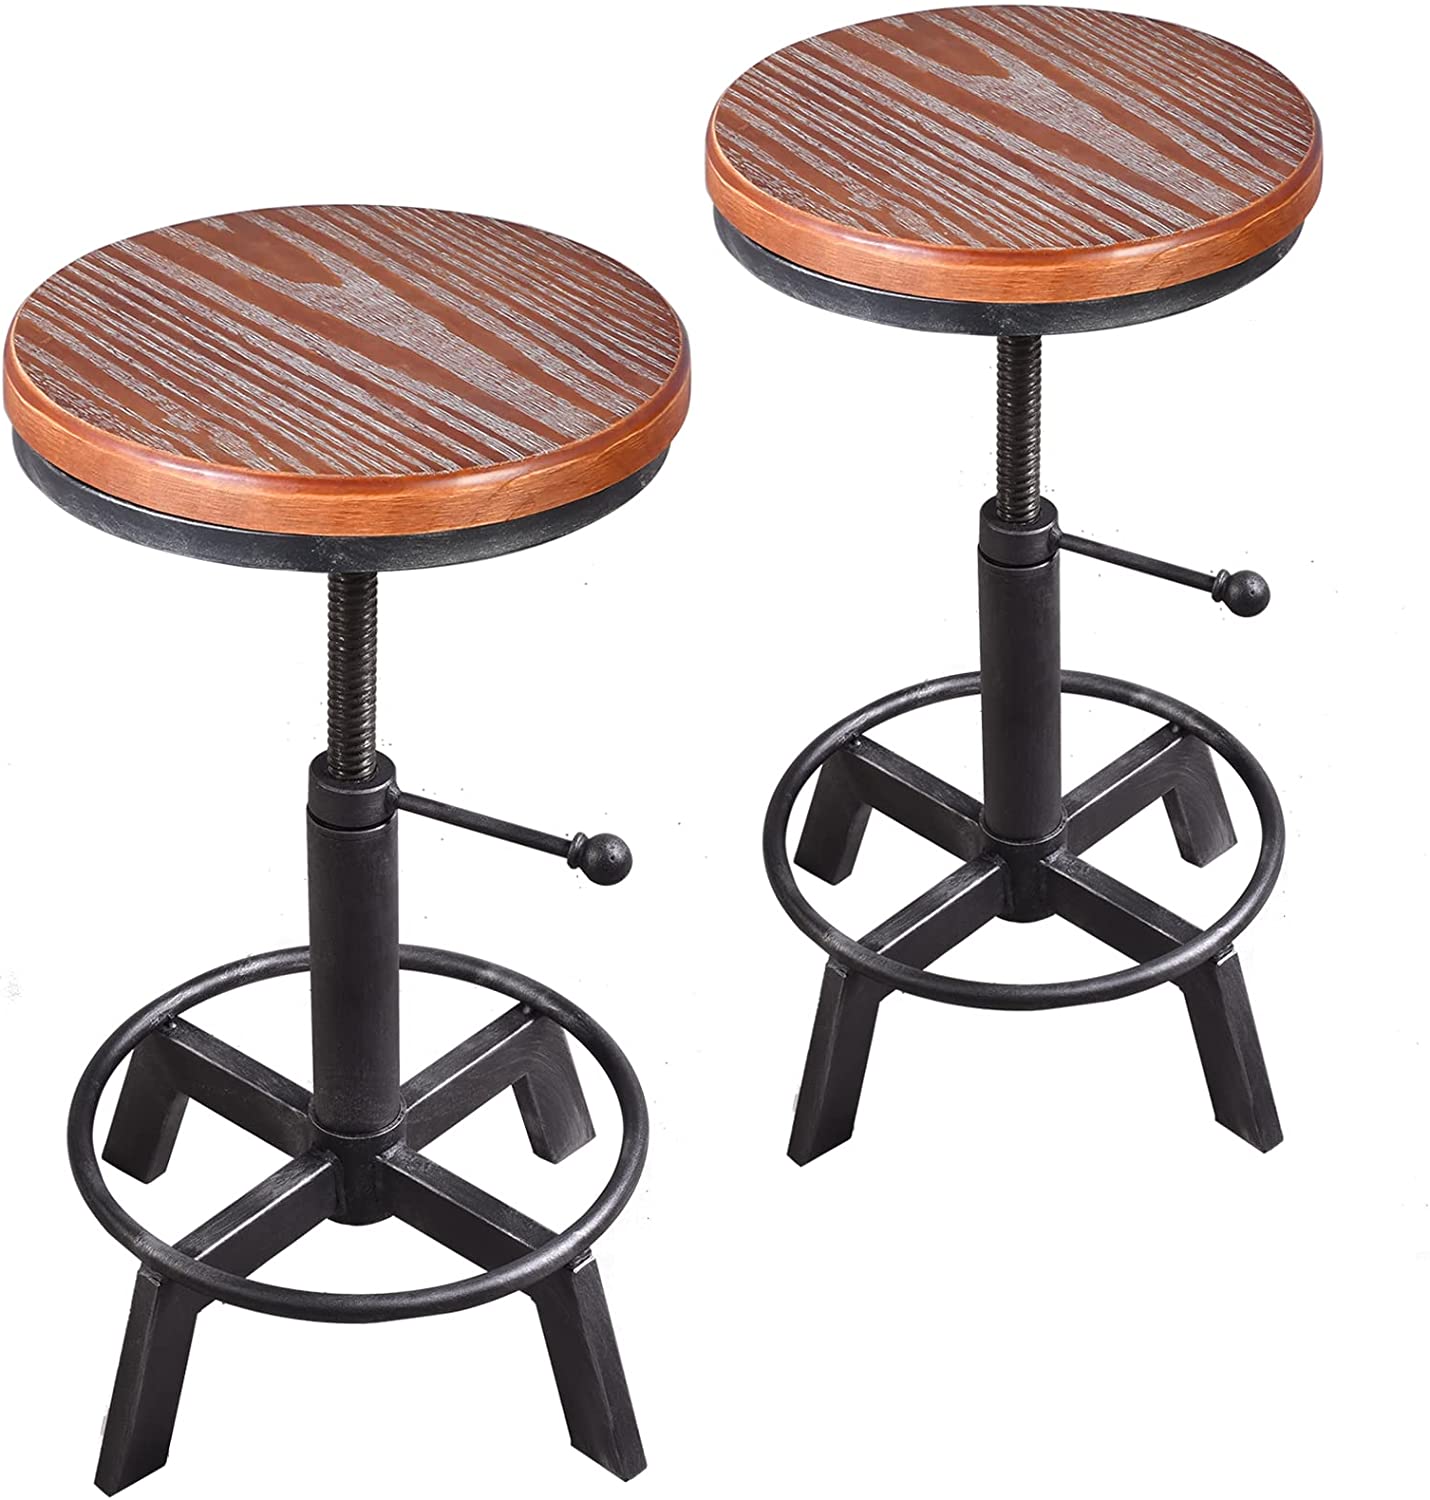 Set of 2-Industrial Bar Stool-Counter Height Chairs- Swivel Wooden Seat- Adjustable 17.7-24inch